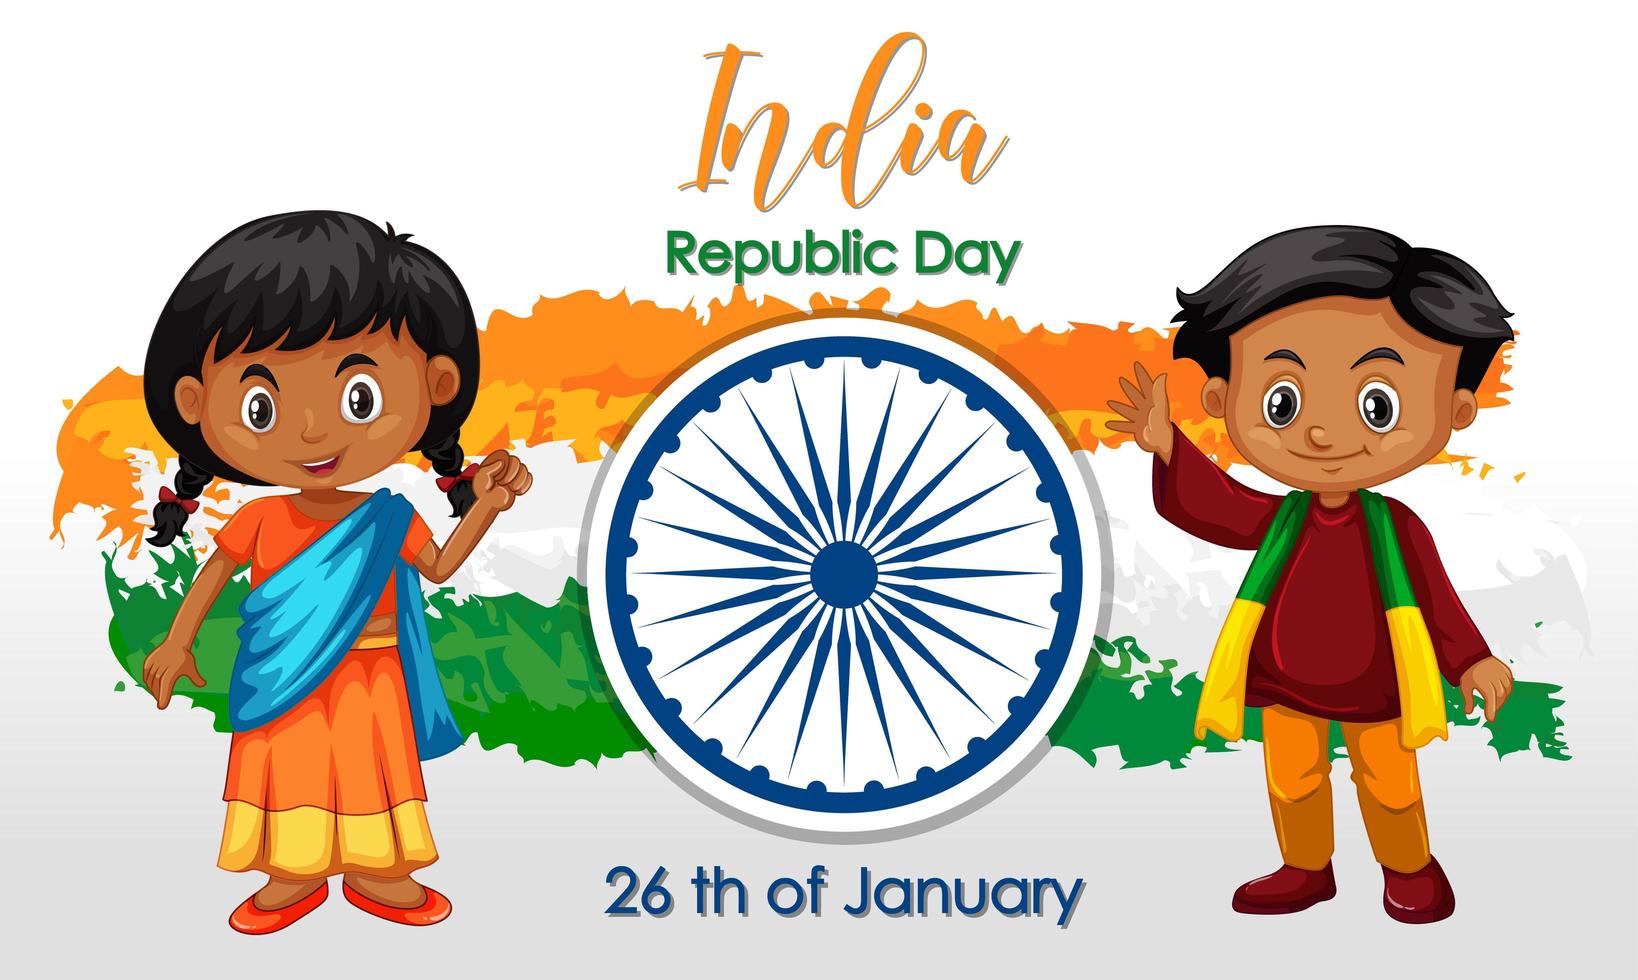 India Holiday with happy kids vector